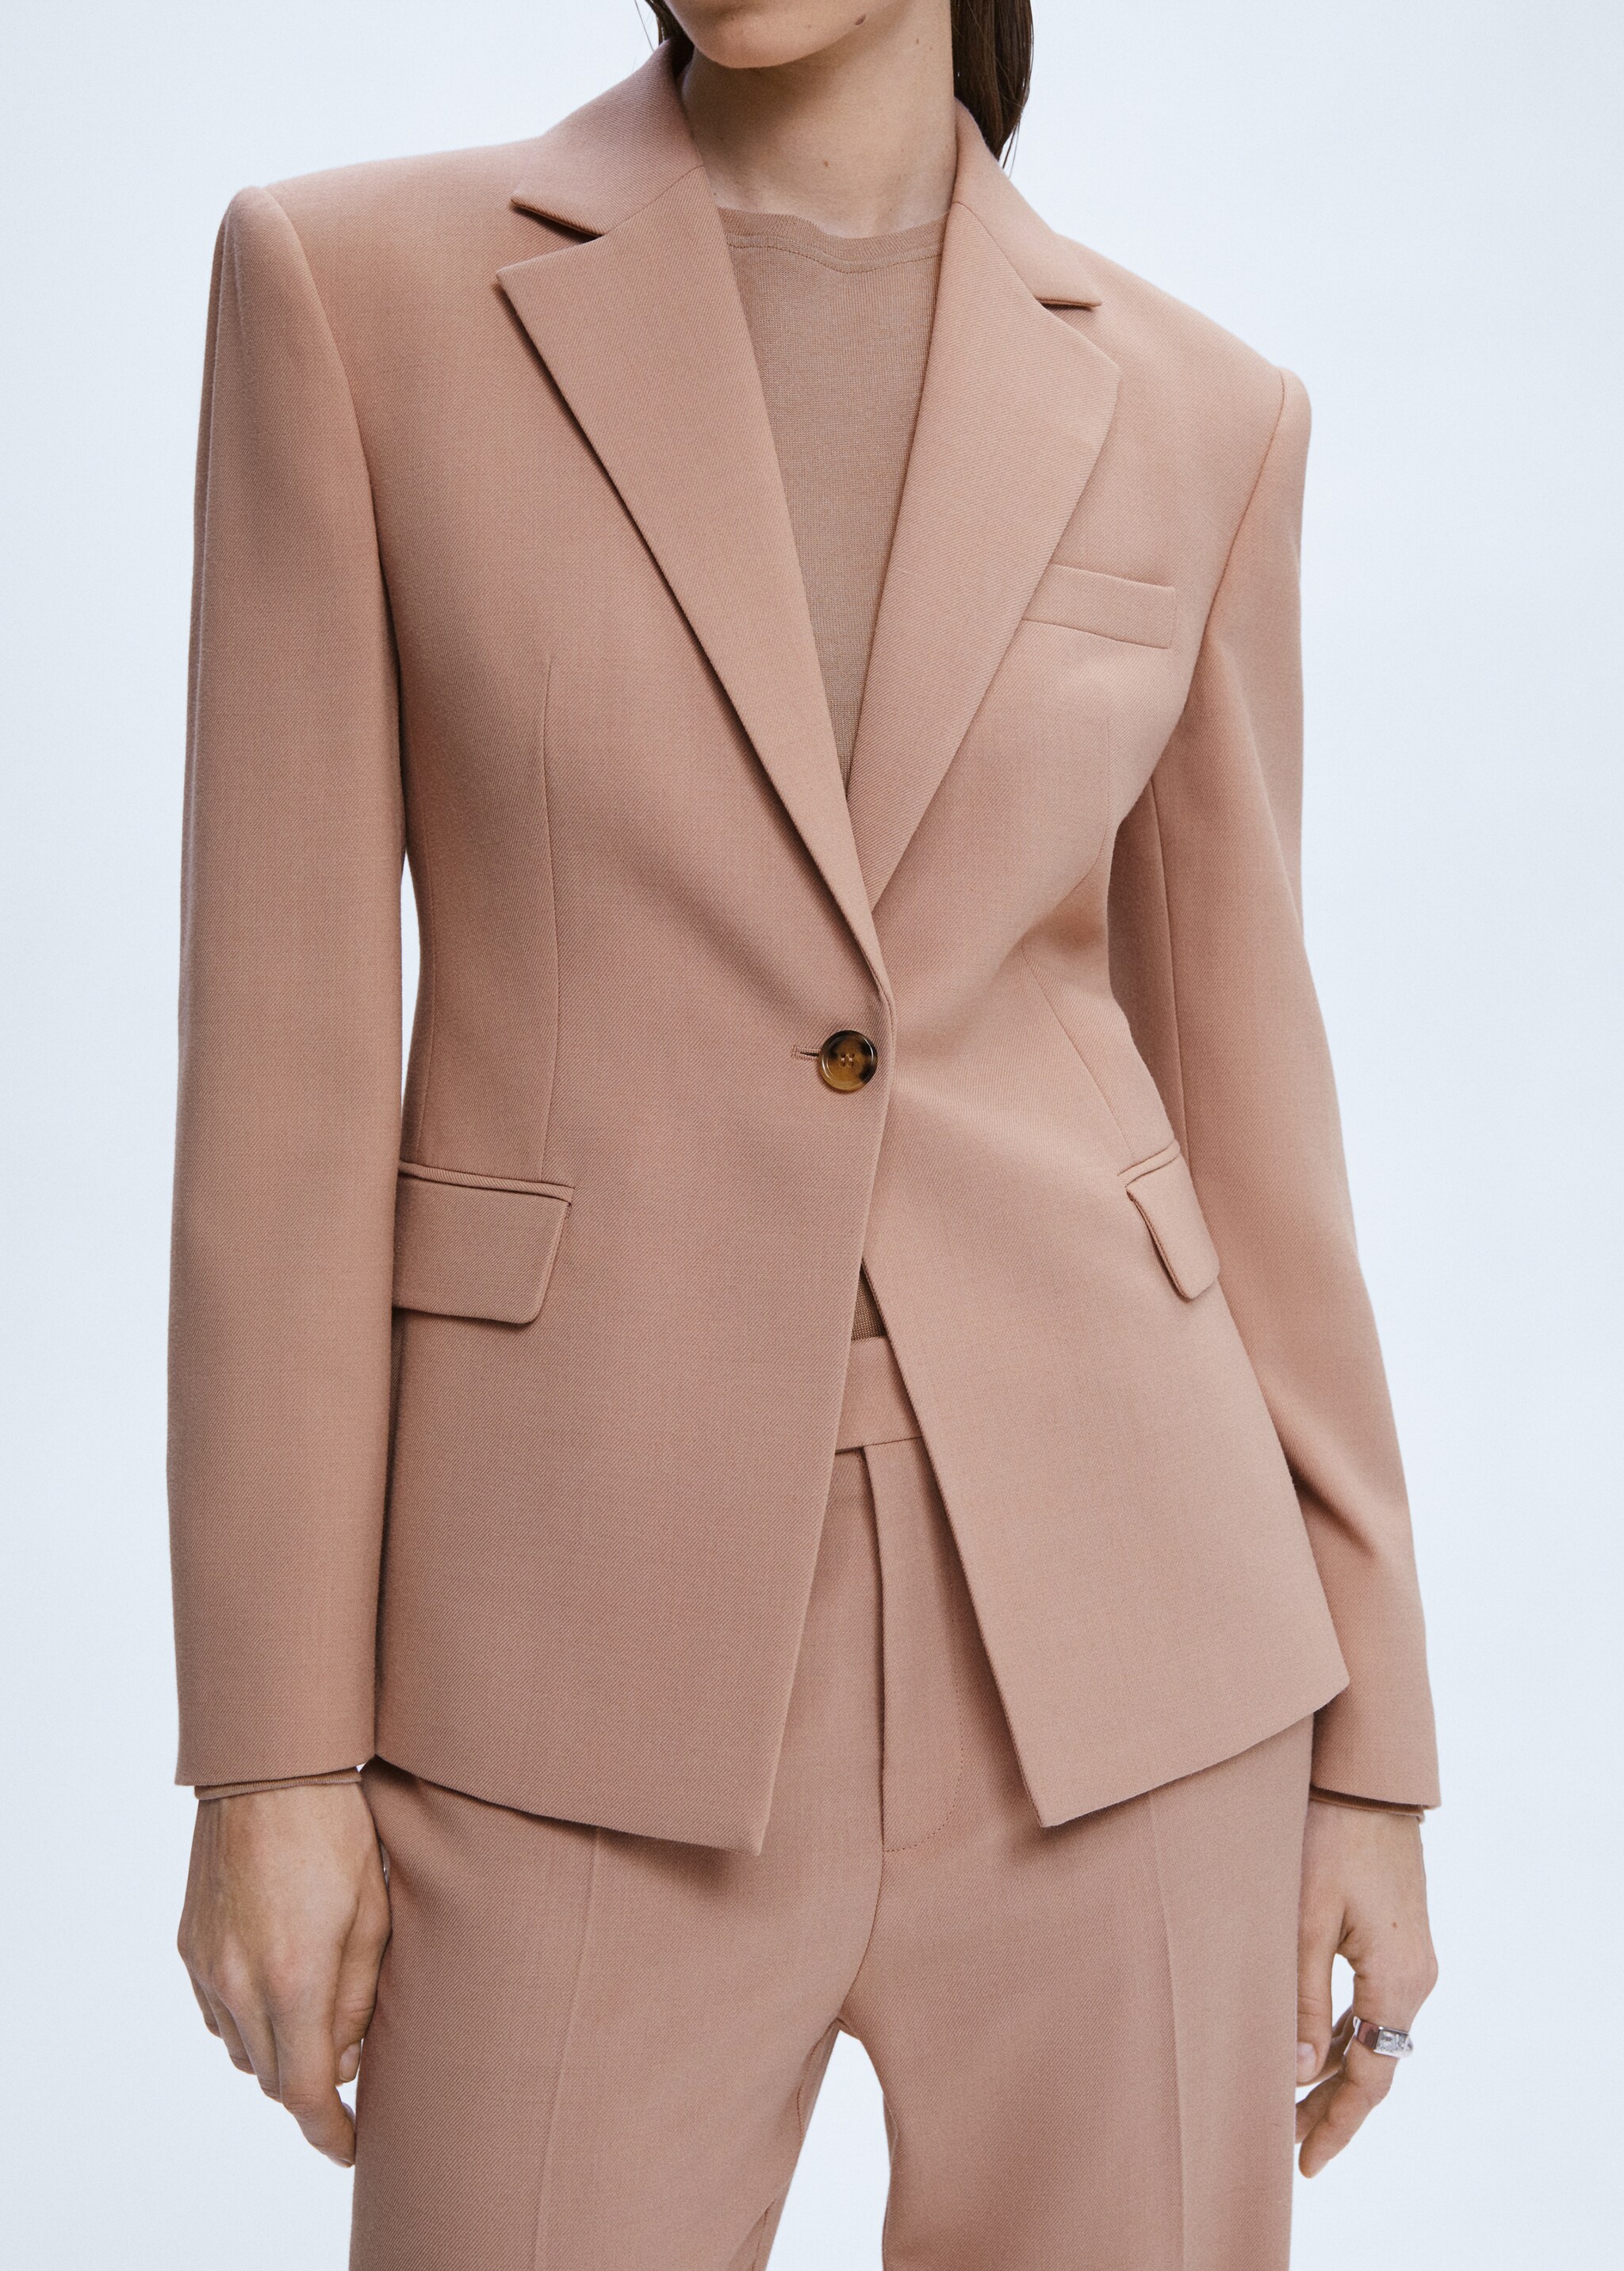 Suit jacket seams - Details of the article 6